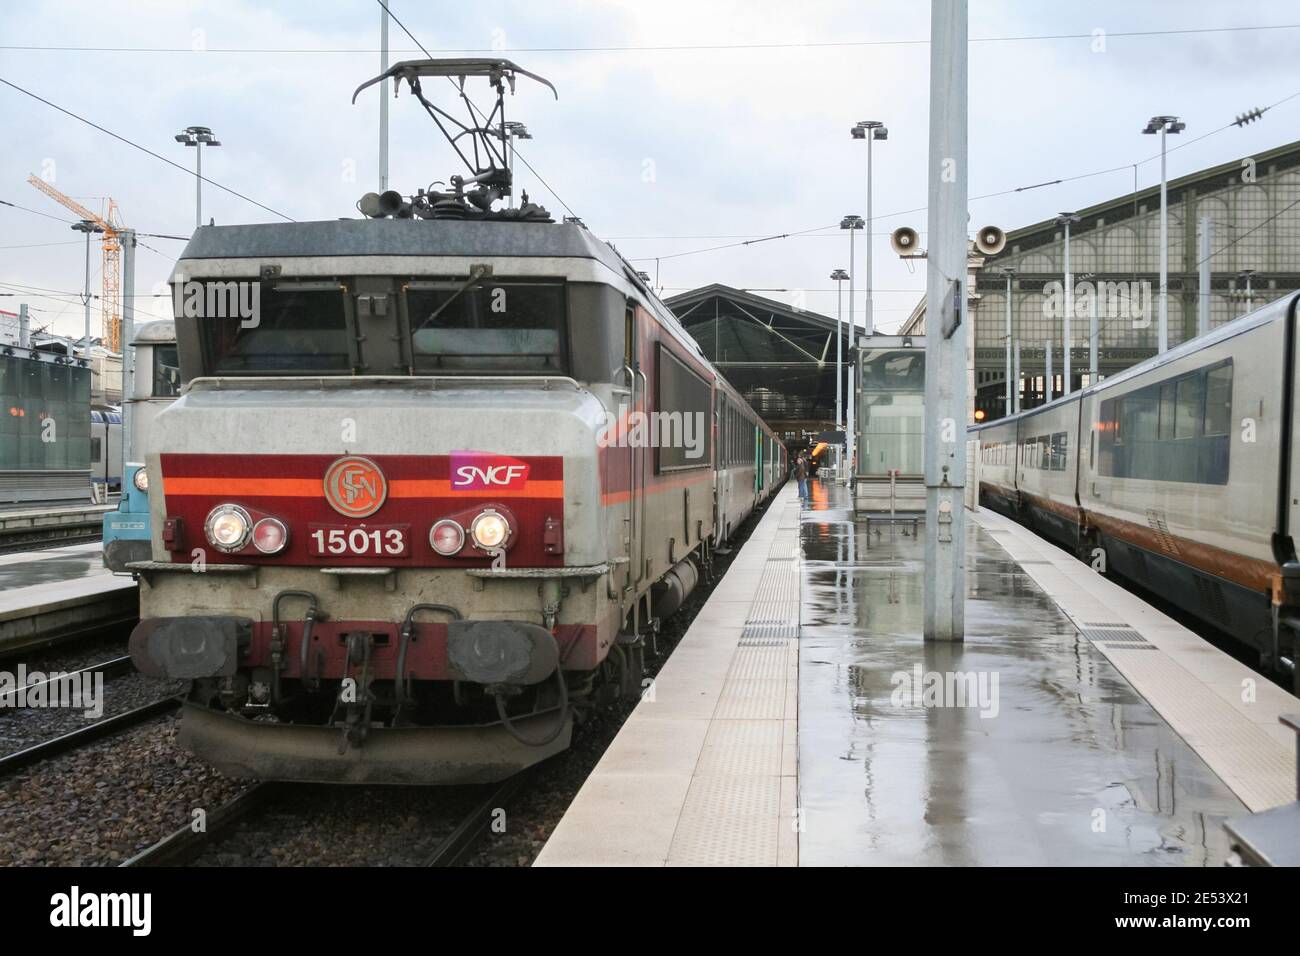 PARIS, FRANCE - JANUARY 2, 2007: Passenger Train Corail intercites ready for departure in Paris Gare du Nord train station, belonging to SNCF company Stock Photo